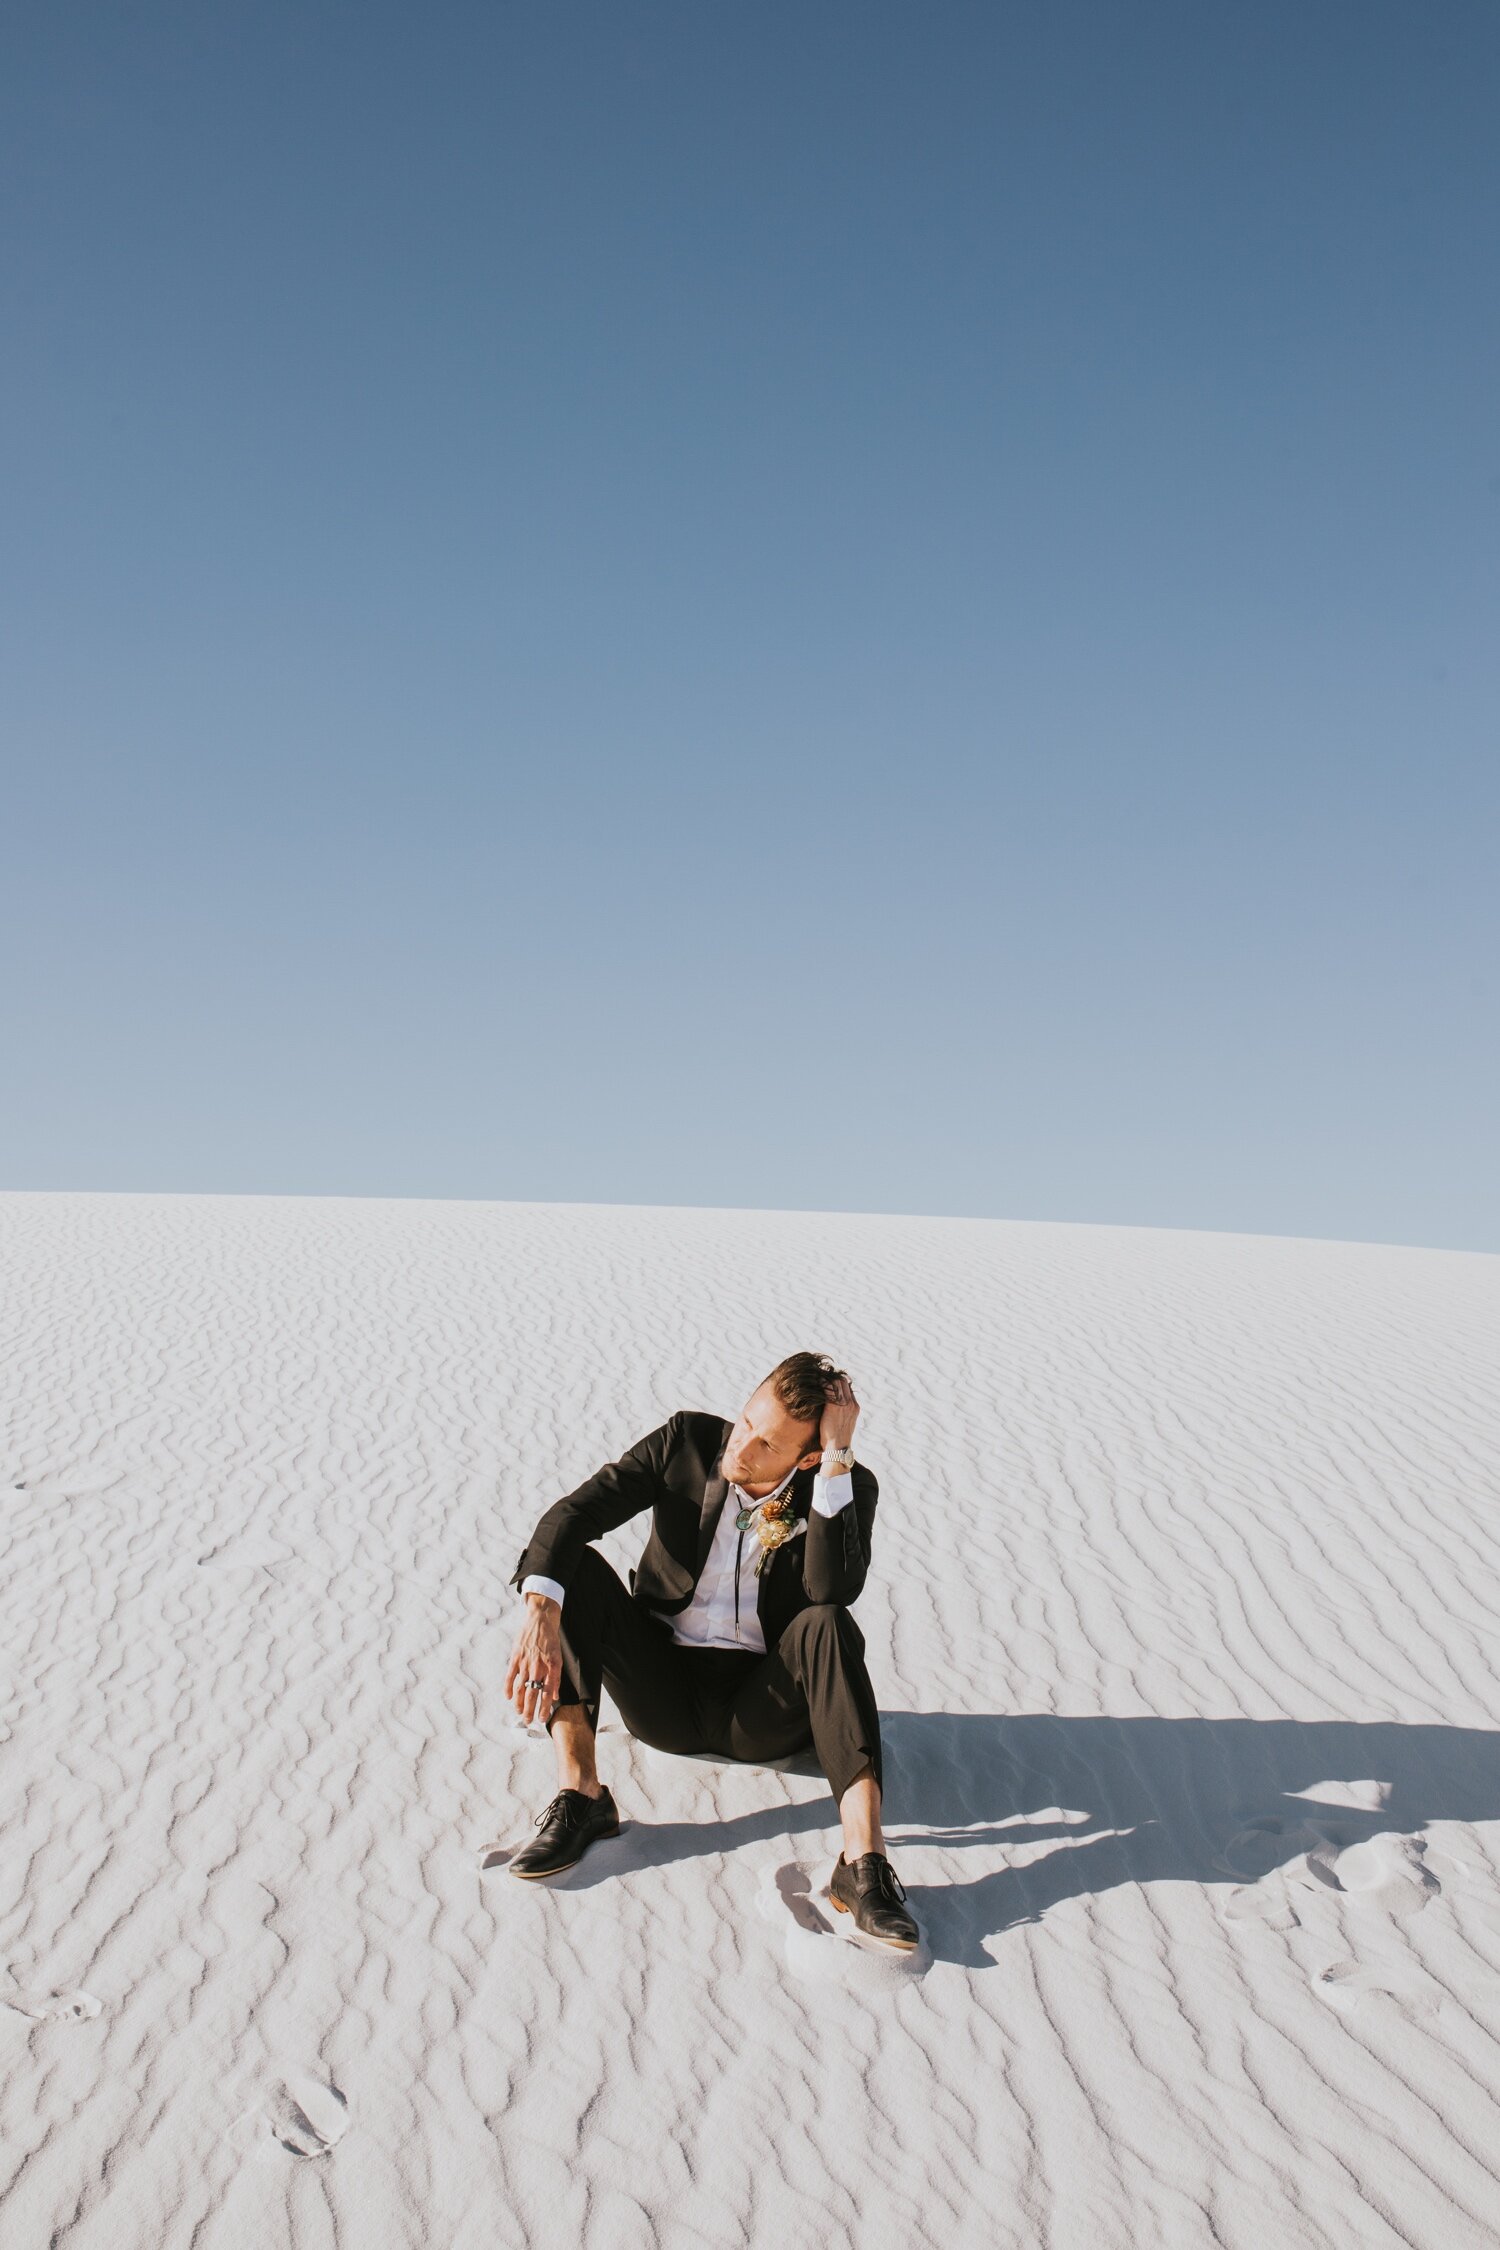 White Sands National Monument, New Mexico Wedding, White Sands Wedding, White Sands Elopement, Las Cruces Wedding Photographer